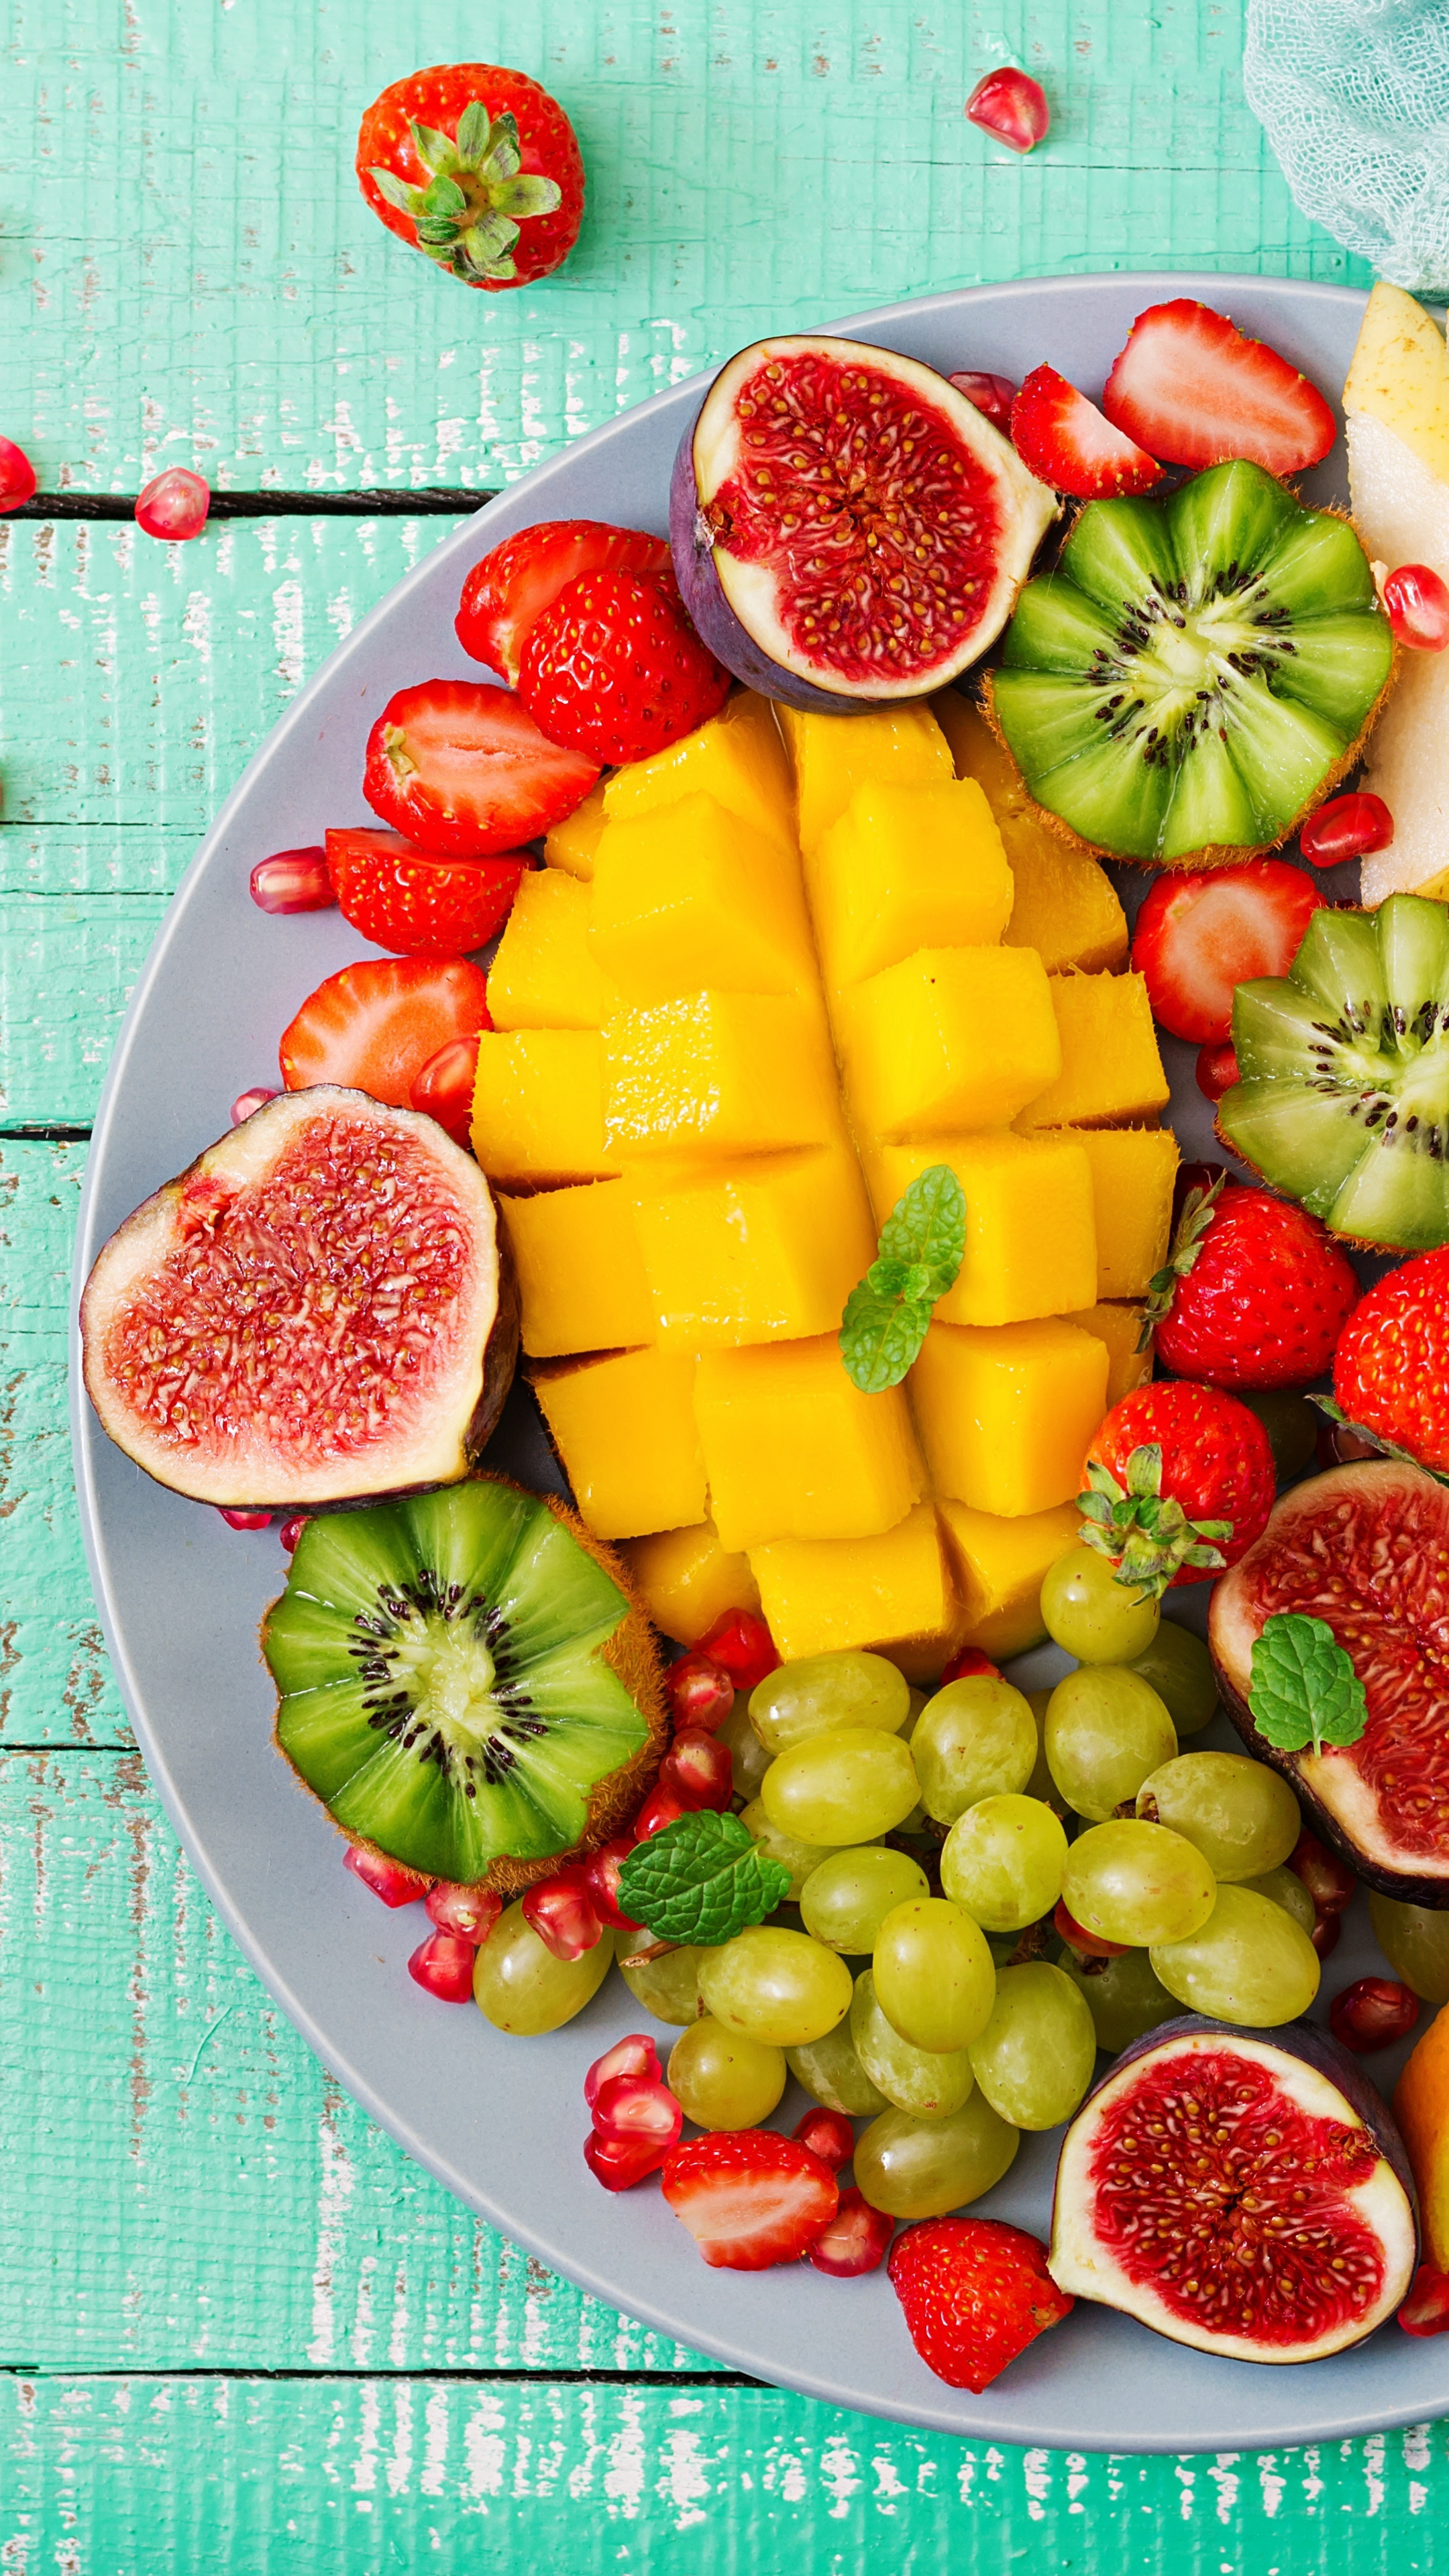 Colorful fruit salad, Fresh and vibrant, Healthy refreshment, Wholesome dish, 2160x3840 4K Handy